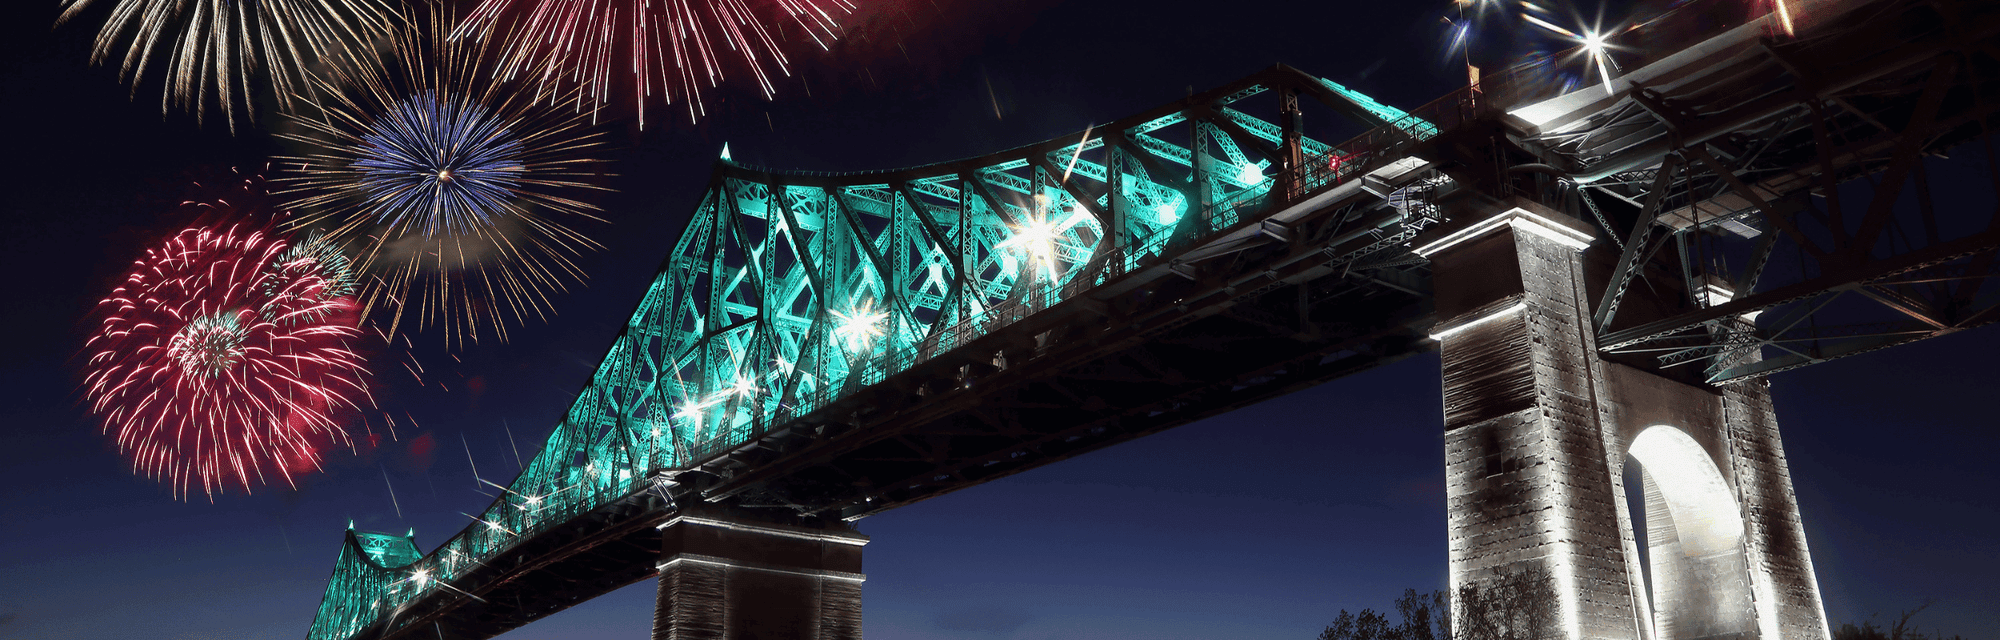 Colorful fireworks explode over bridge near Warwick Le Crystal